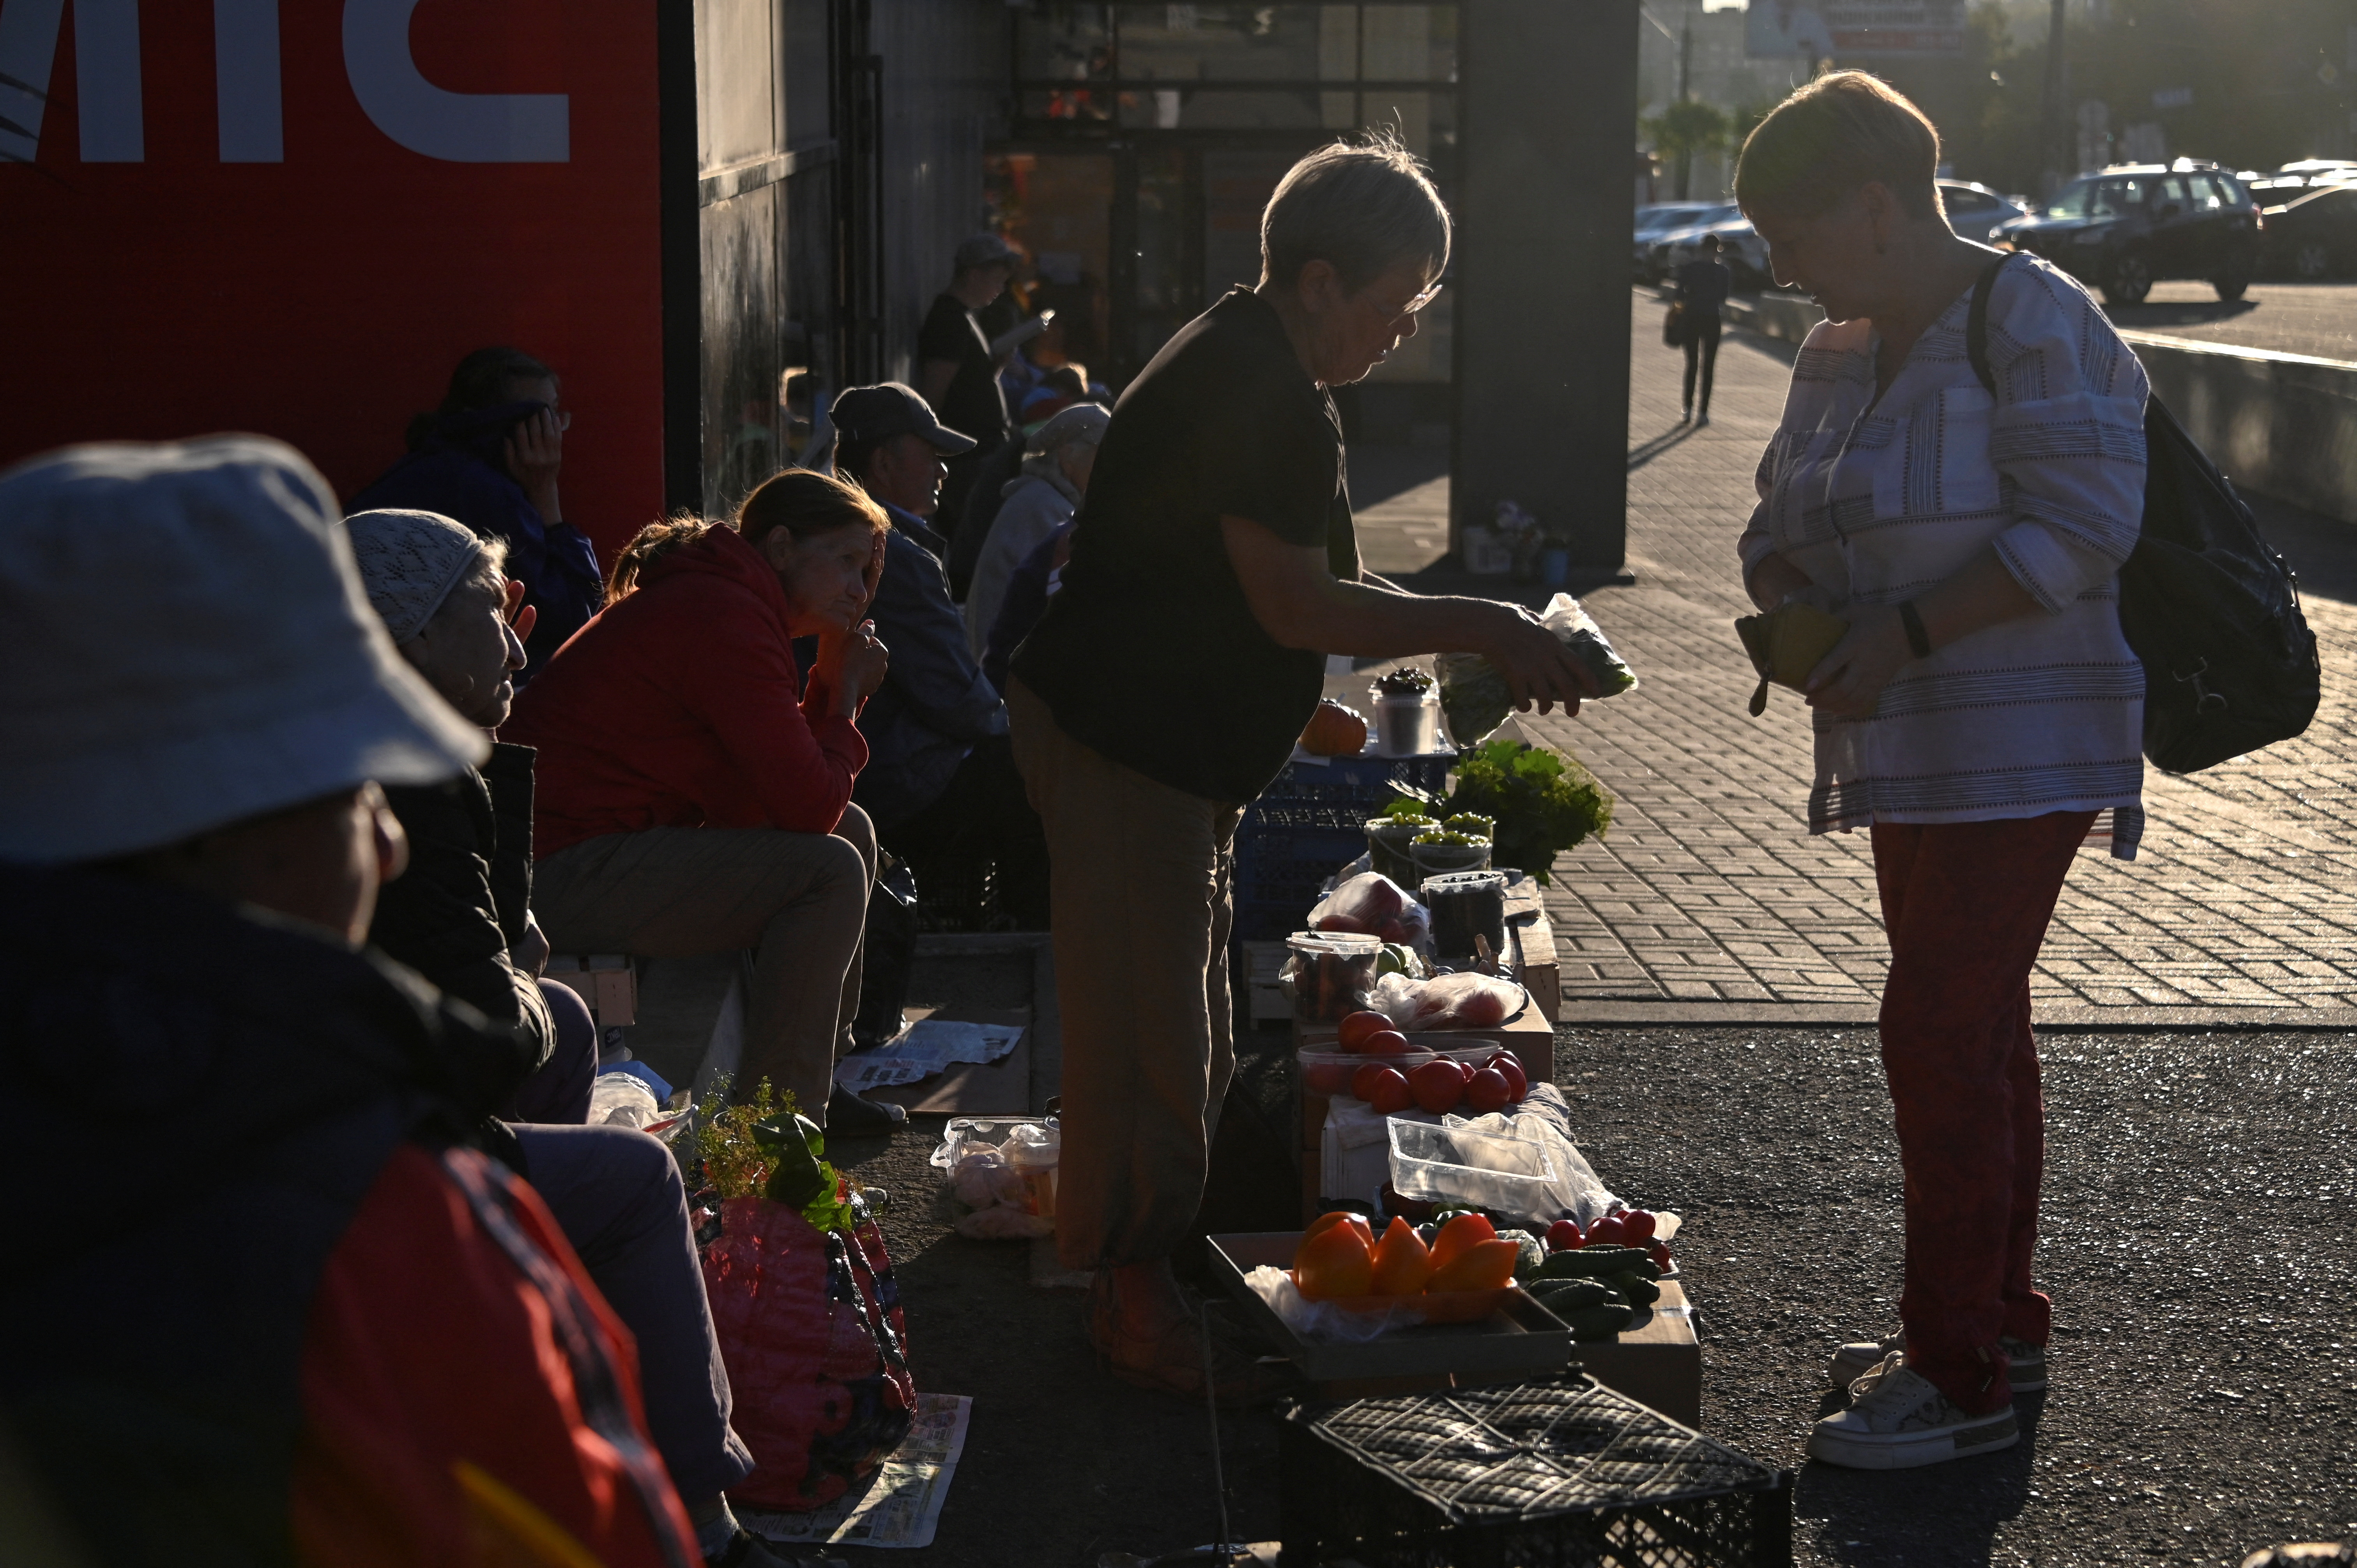 Vendors sell vegetables and other foodstuffs in a street in Izhevsk